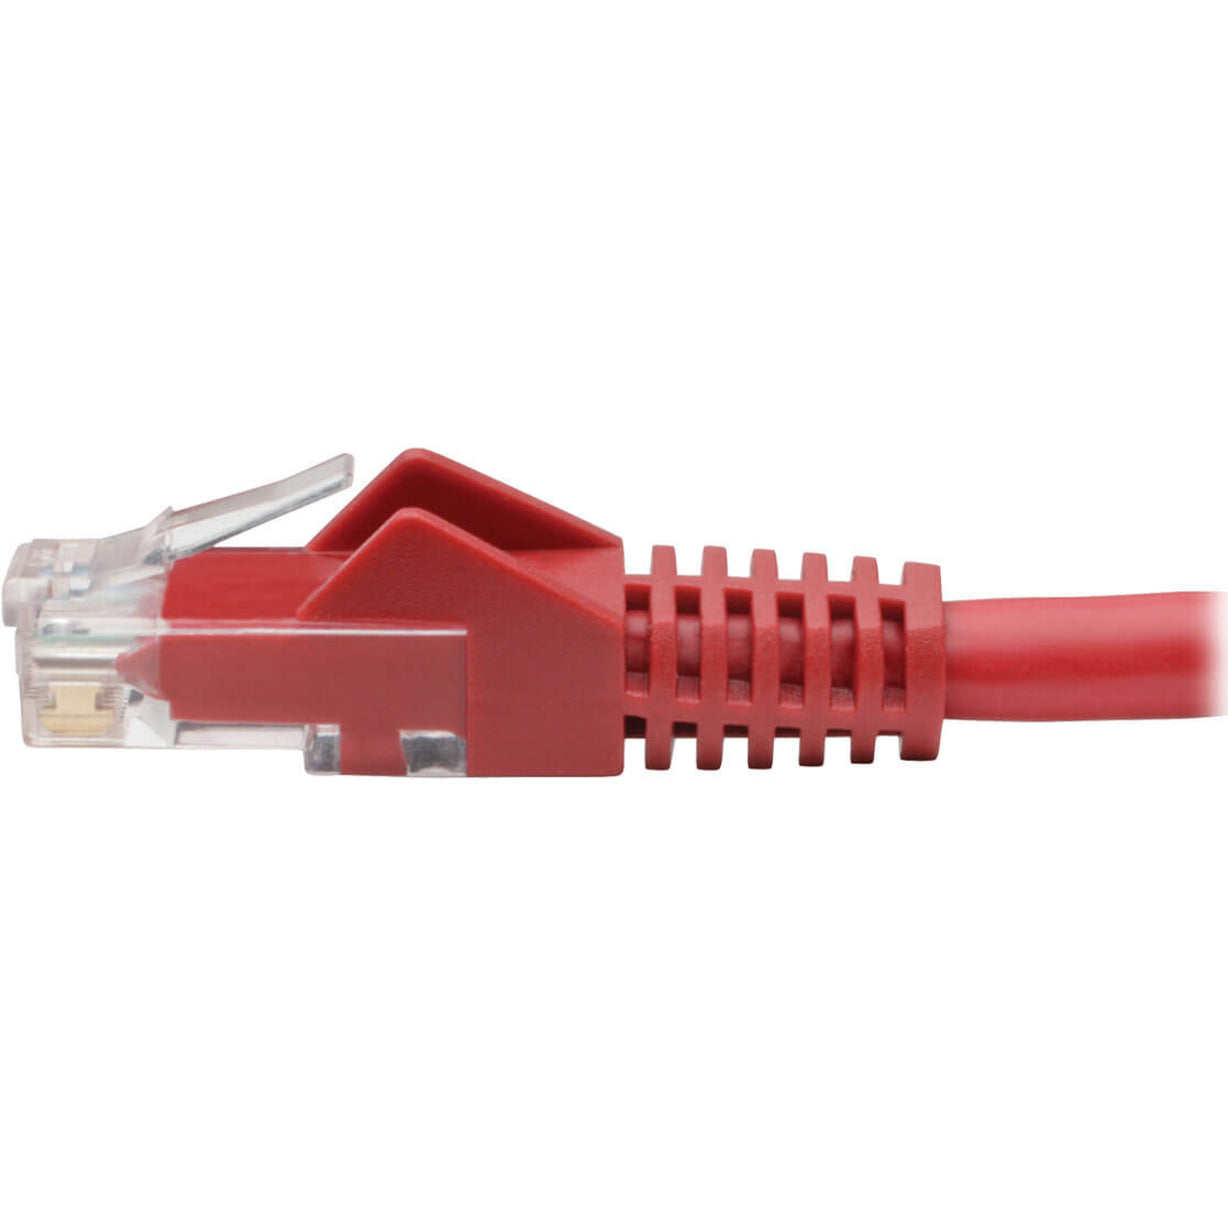 Tripp Lite N201-004-RD Cat.6 UTP Patch Network Cable, 4 ft, Gigabit, Snagless, Red